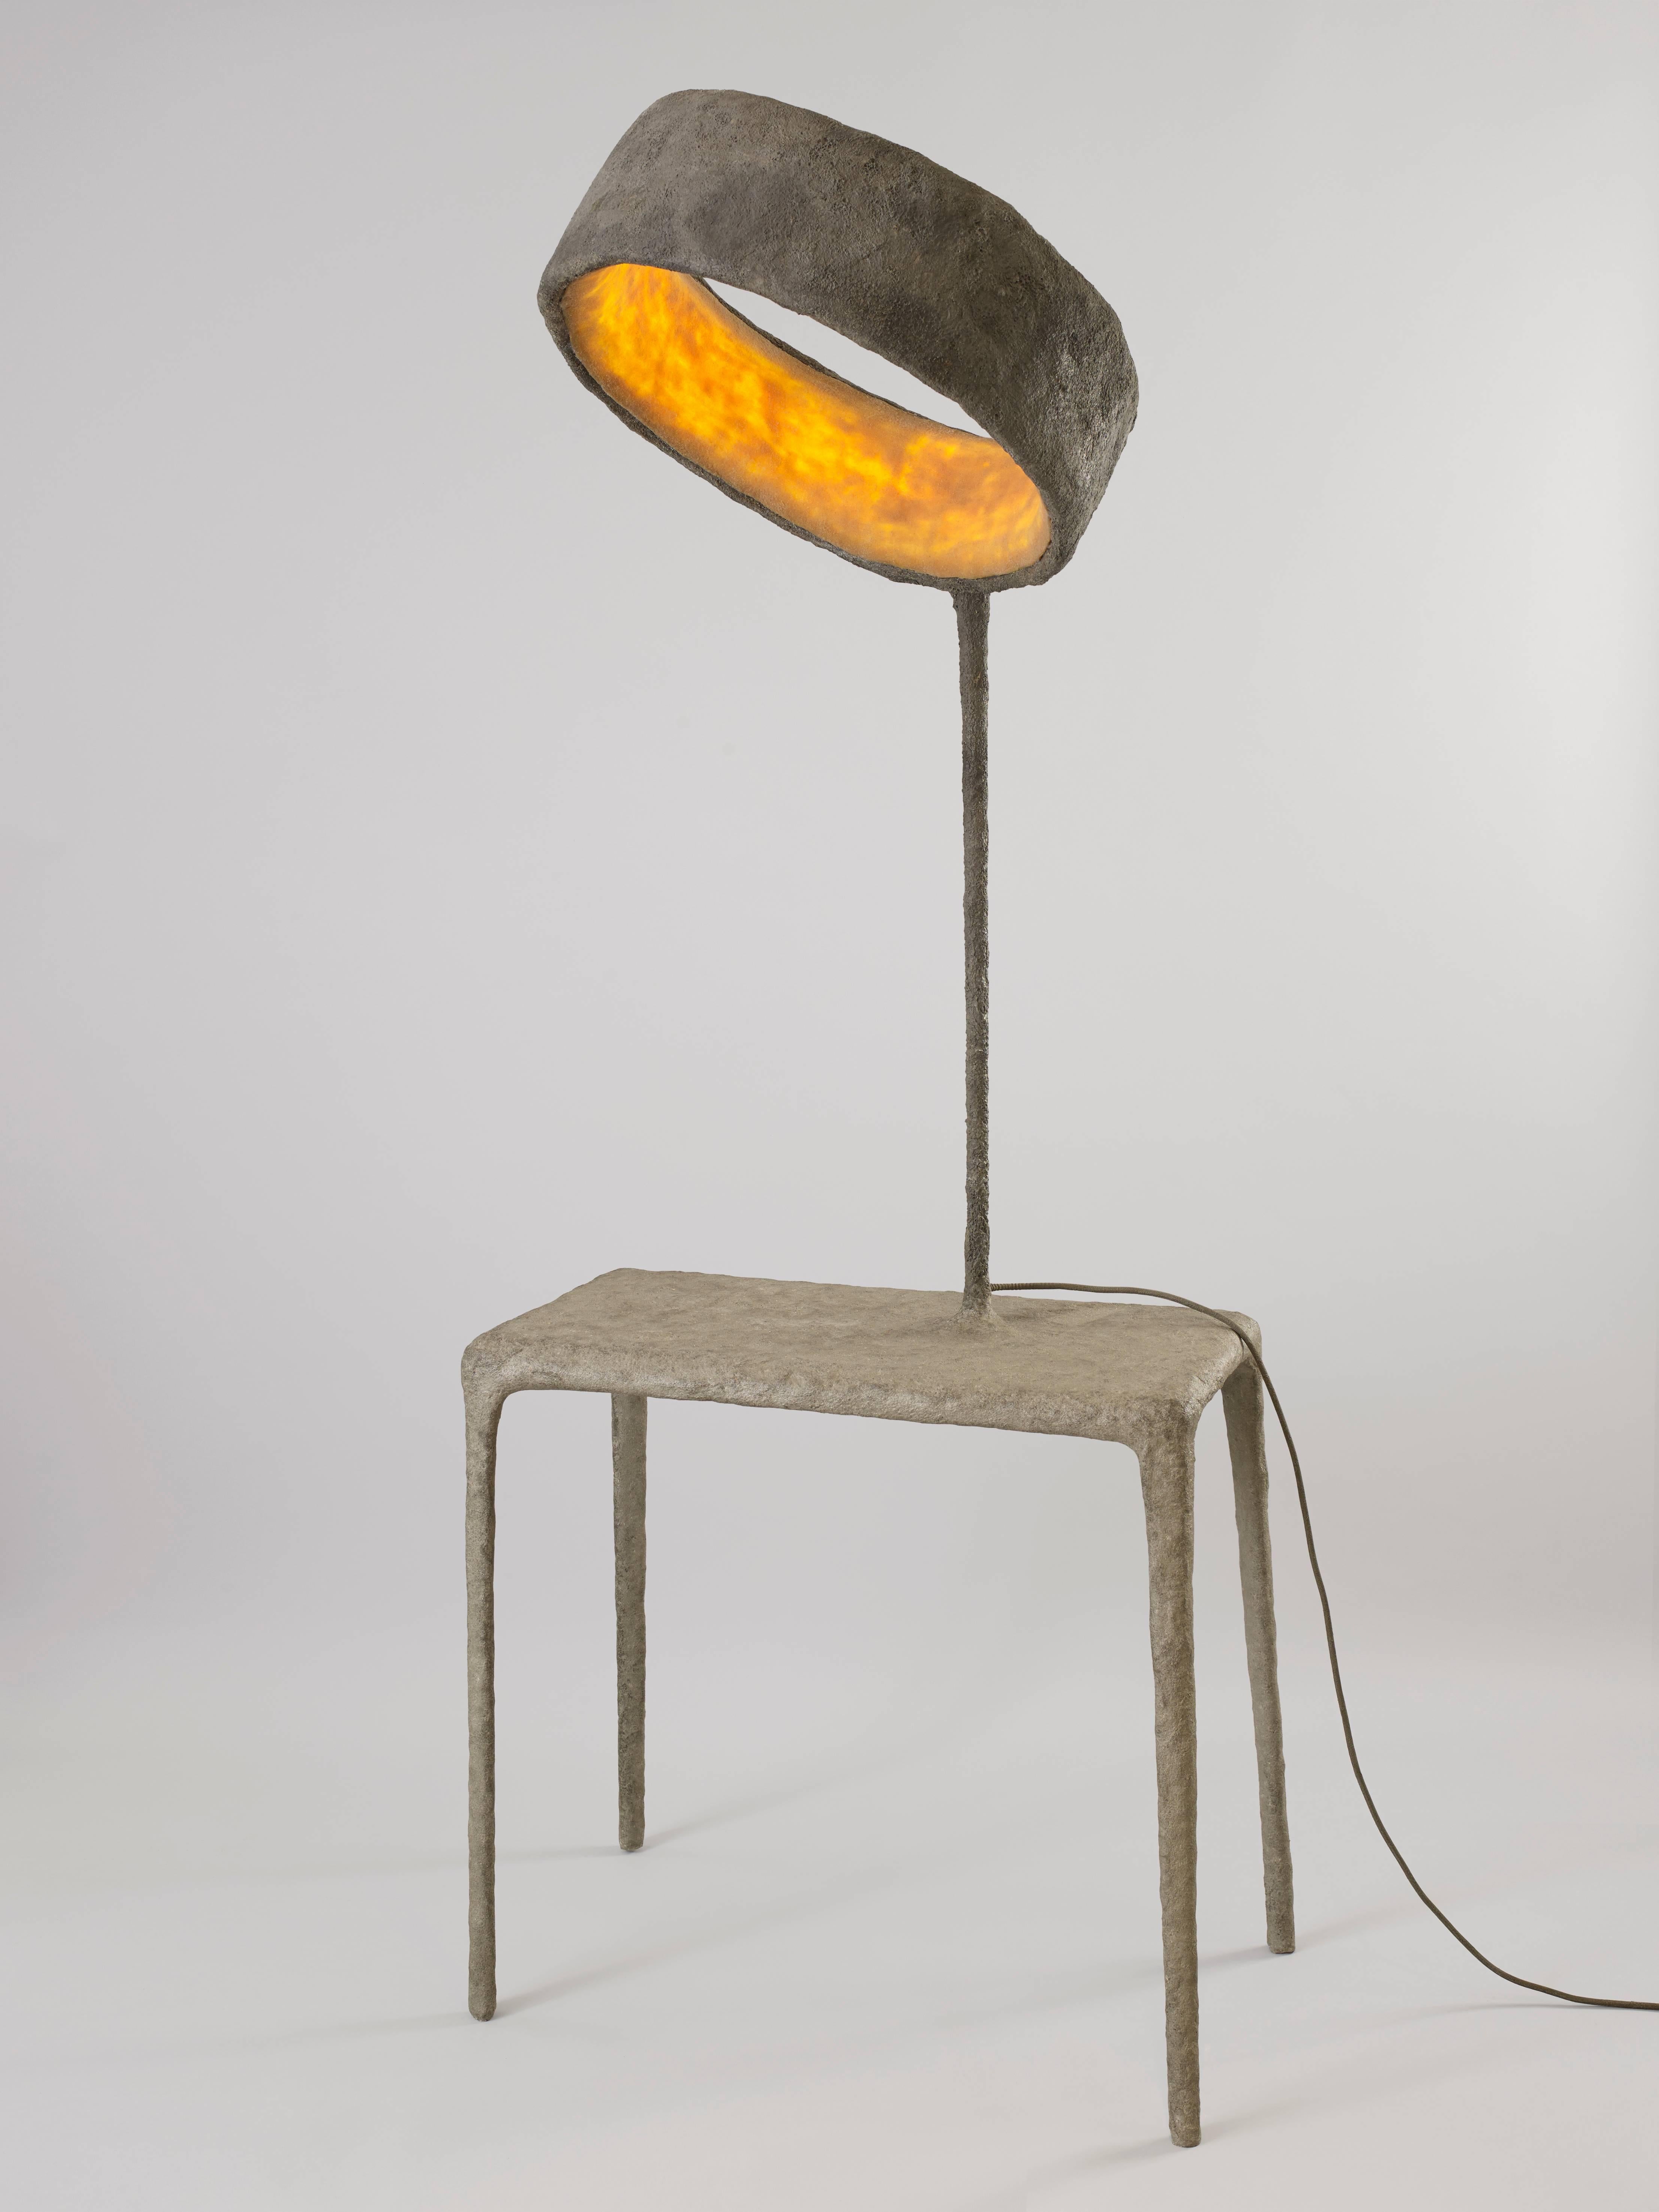 Orange and brown ‘Luciferase’ is a hybrid handmade sculptural console and light-producing creature. It is part of ‘Luciferase’, a collection at the boundaries of Art and Design and Nacho Carbonell’s first work incorporating light. 

“The root of